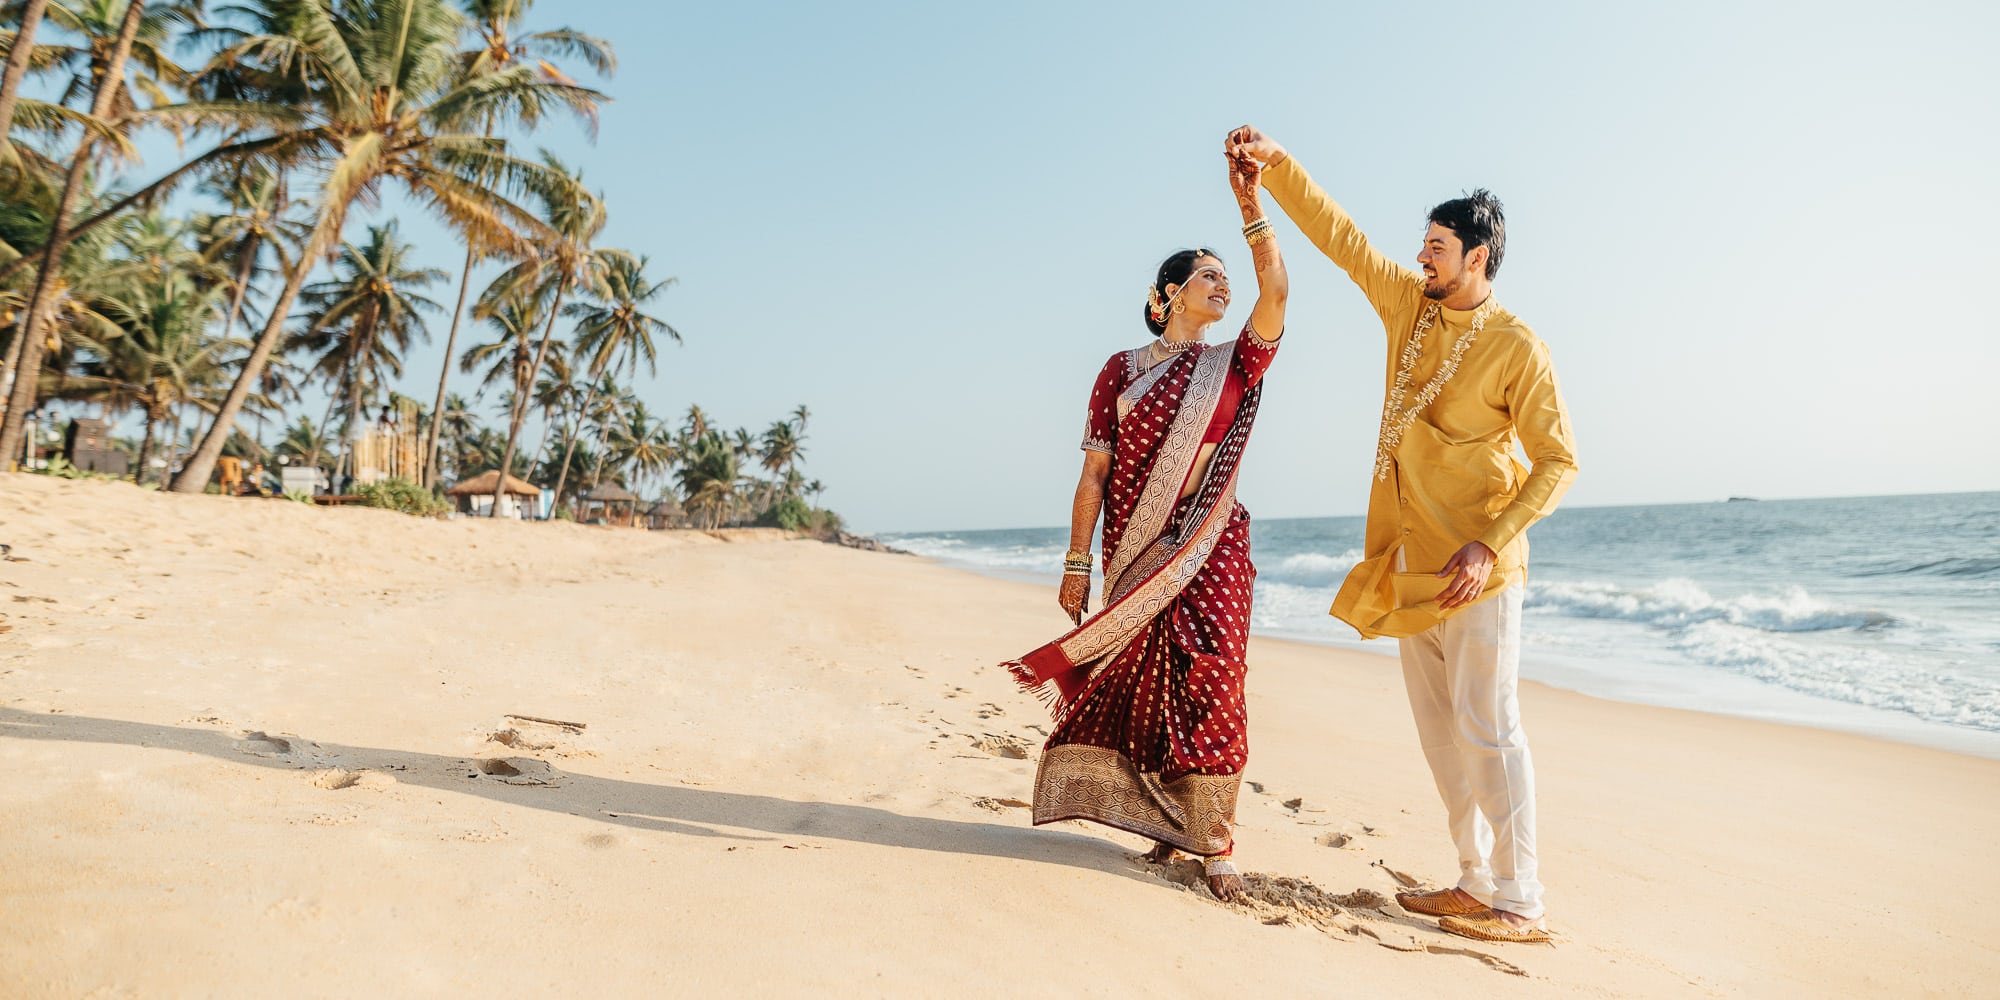 A South Indian couple walking and dancing on the beaching in Mangalore India. The groom is wearing yellow and the bride is wearing a red sari